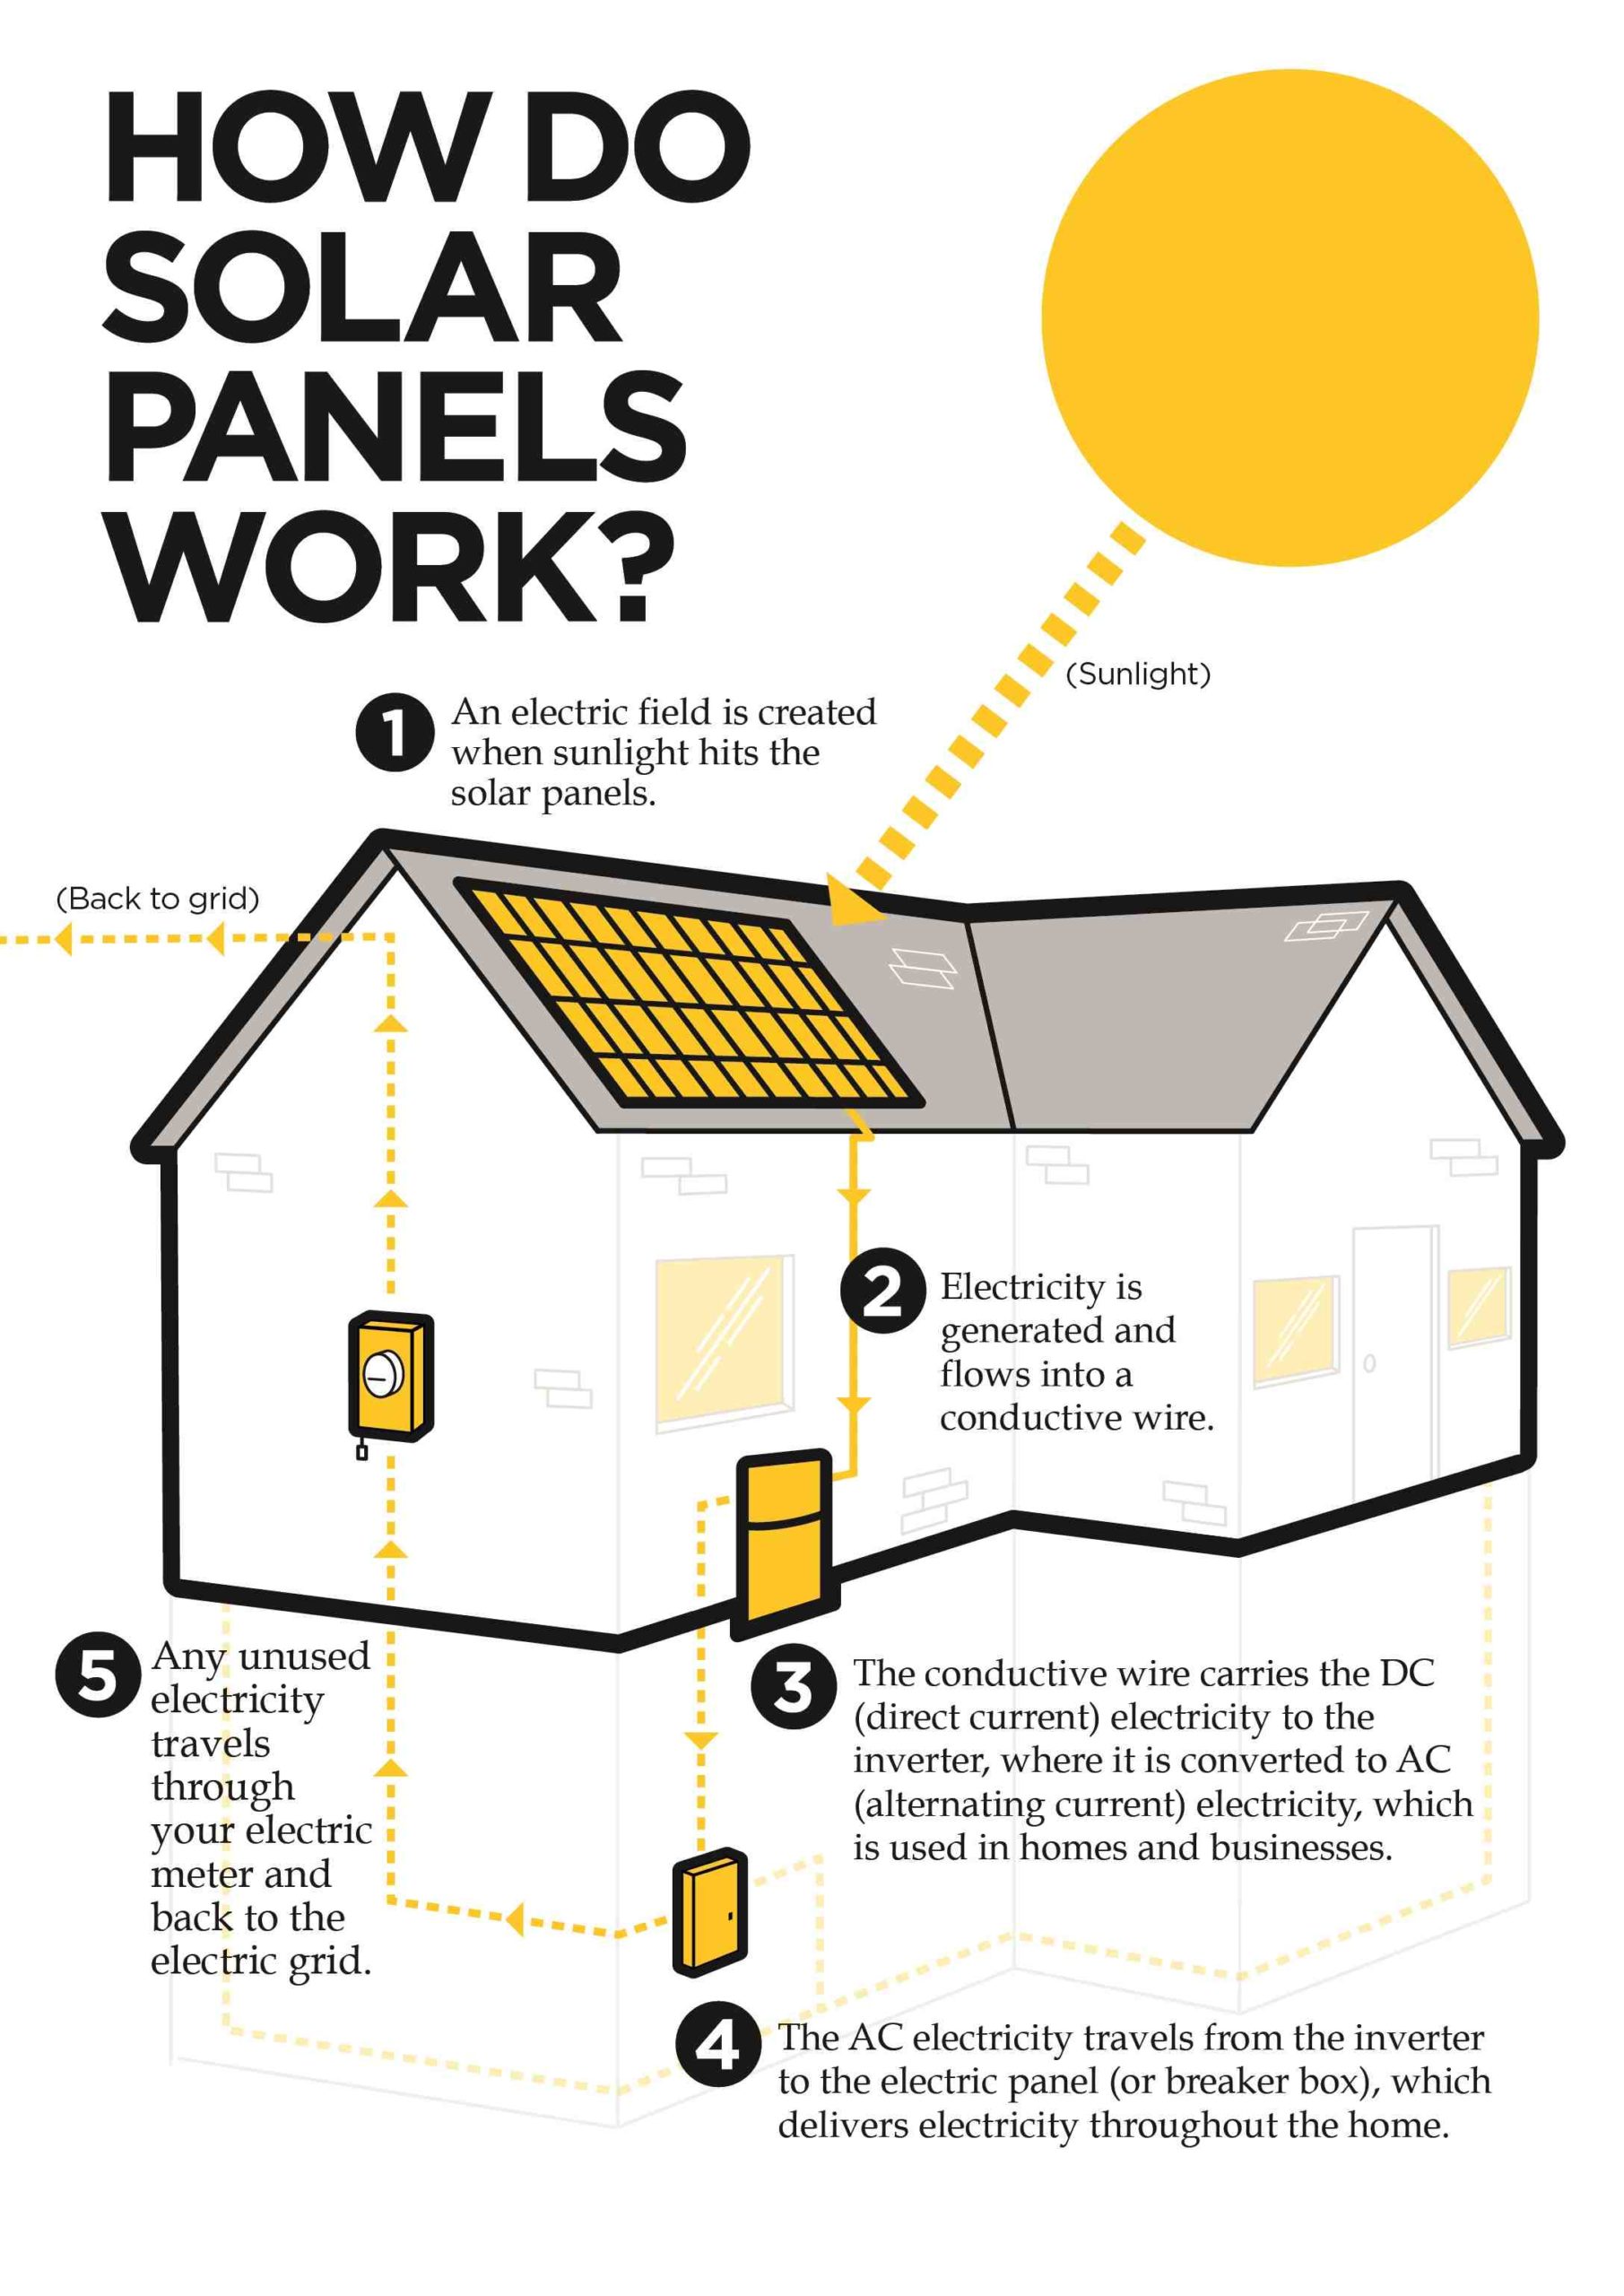 How many solar panels does it take to run a house?